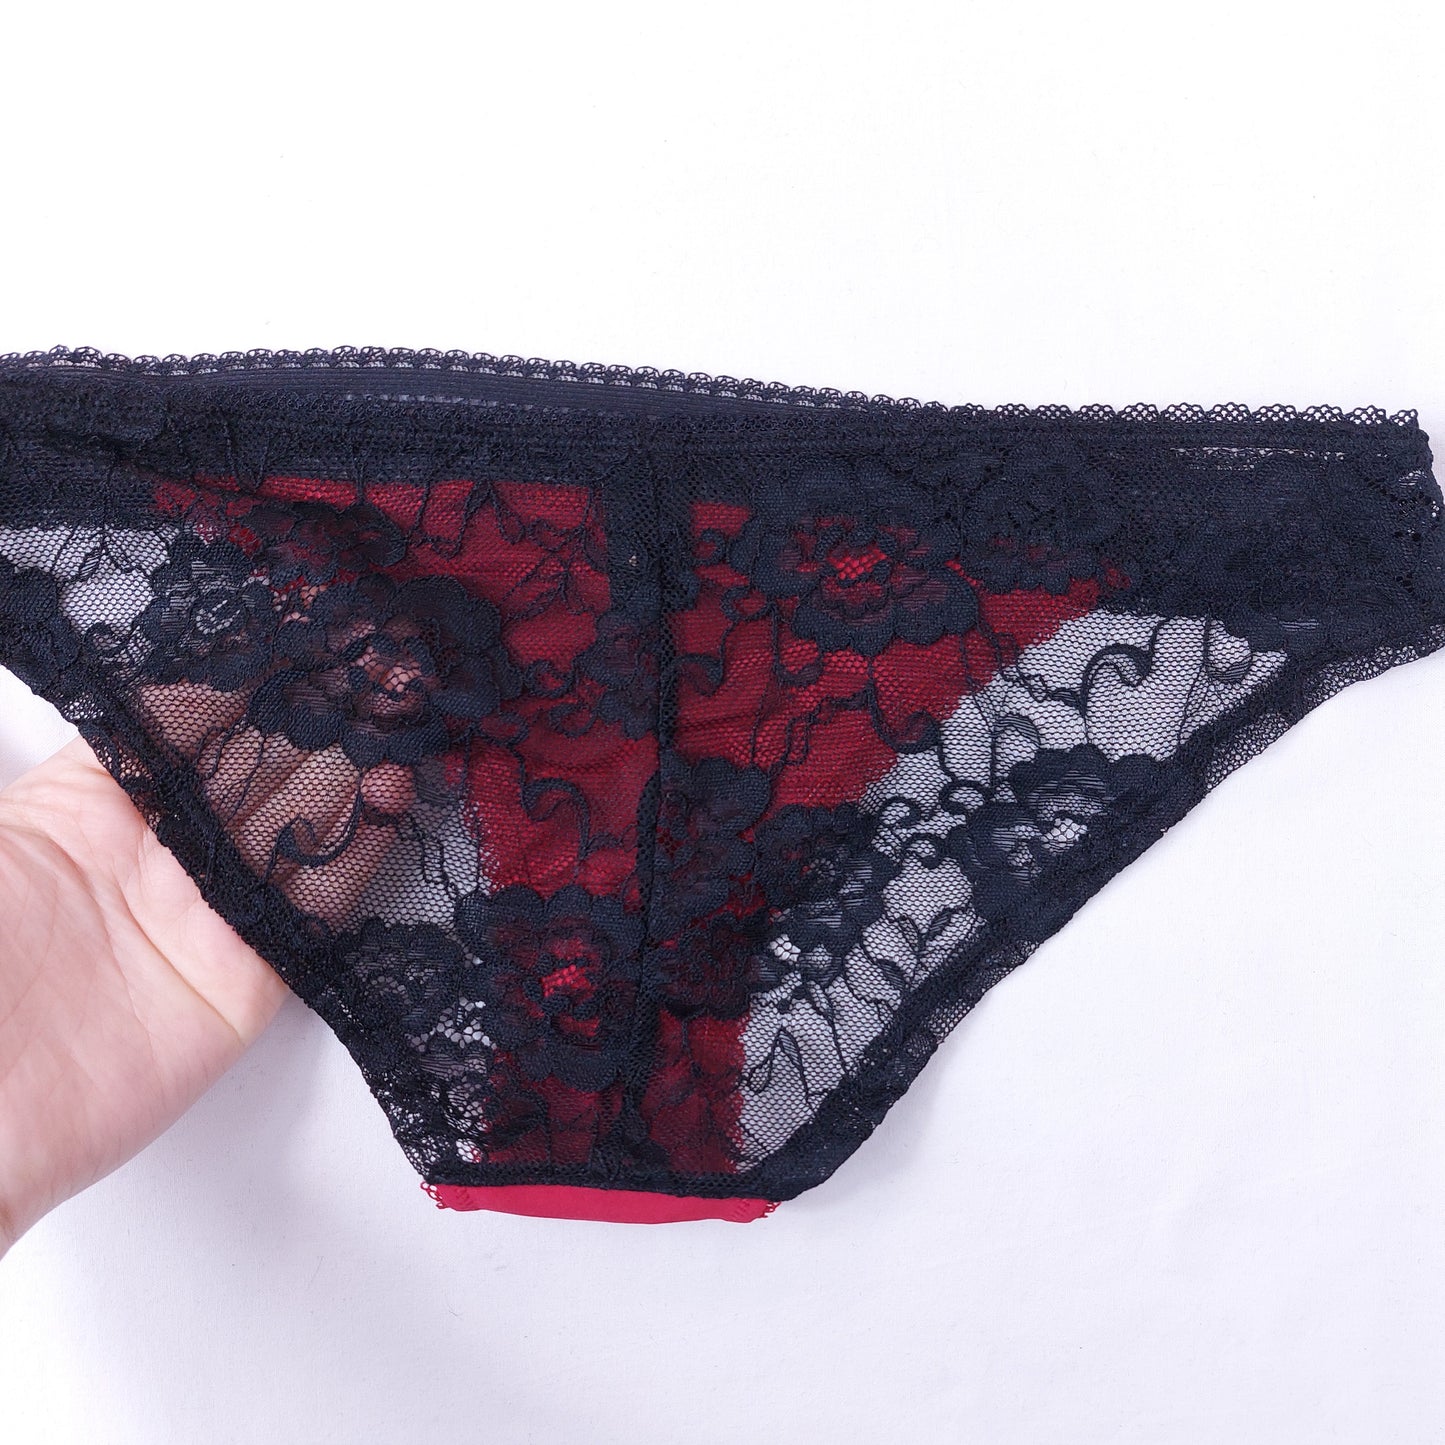 2-Pack Floral Lace Knicker Red 7 Black